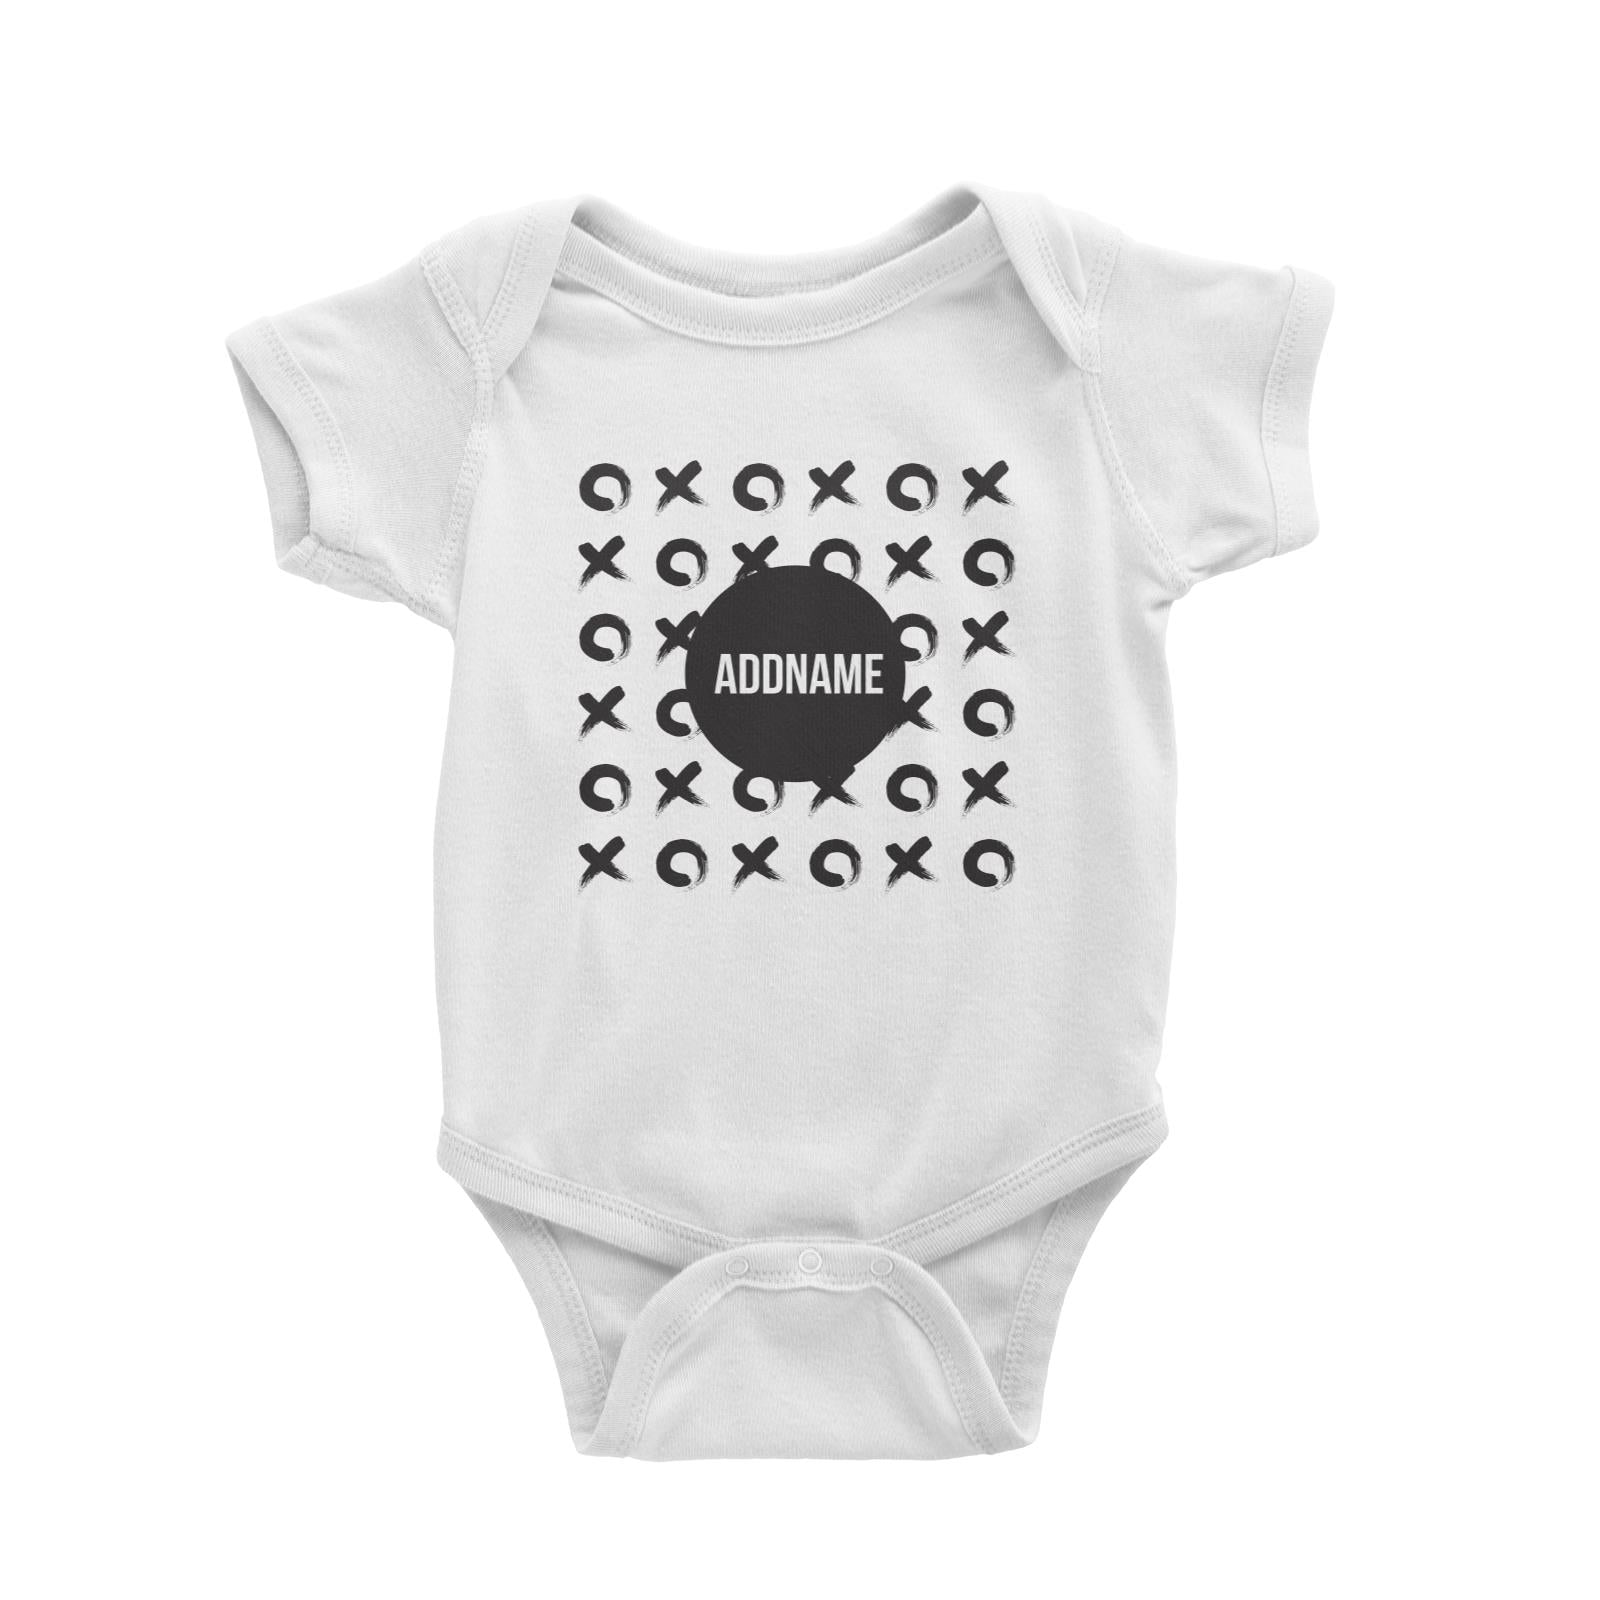 Monochrome Black Tic Tac Toe with Addname Baby Romper